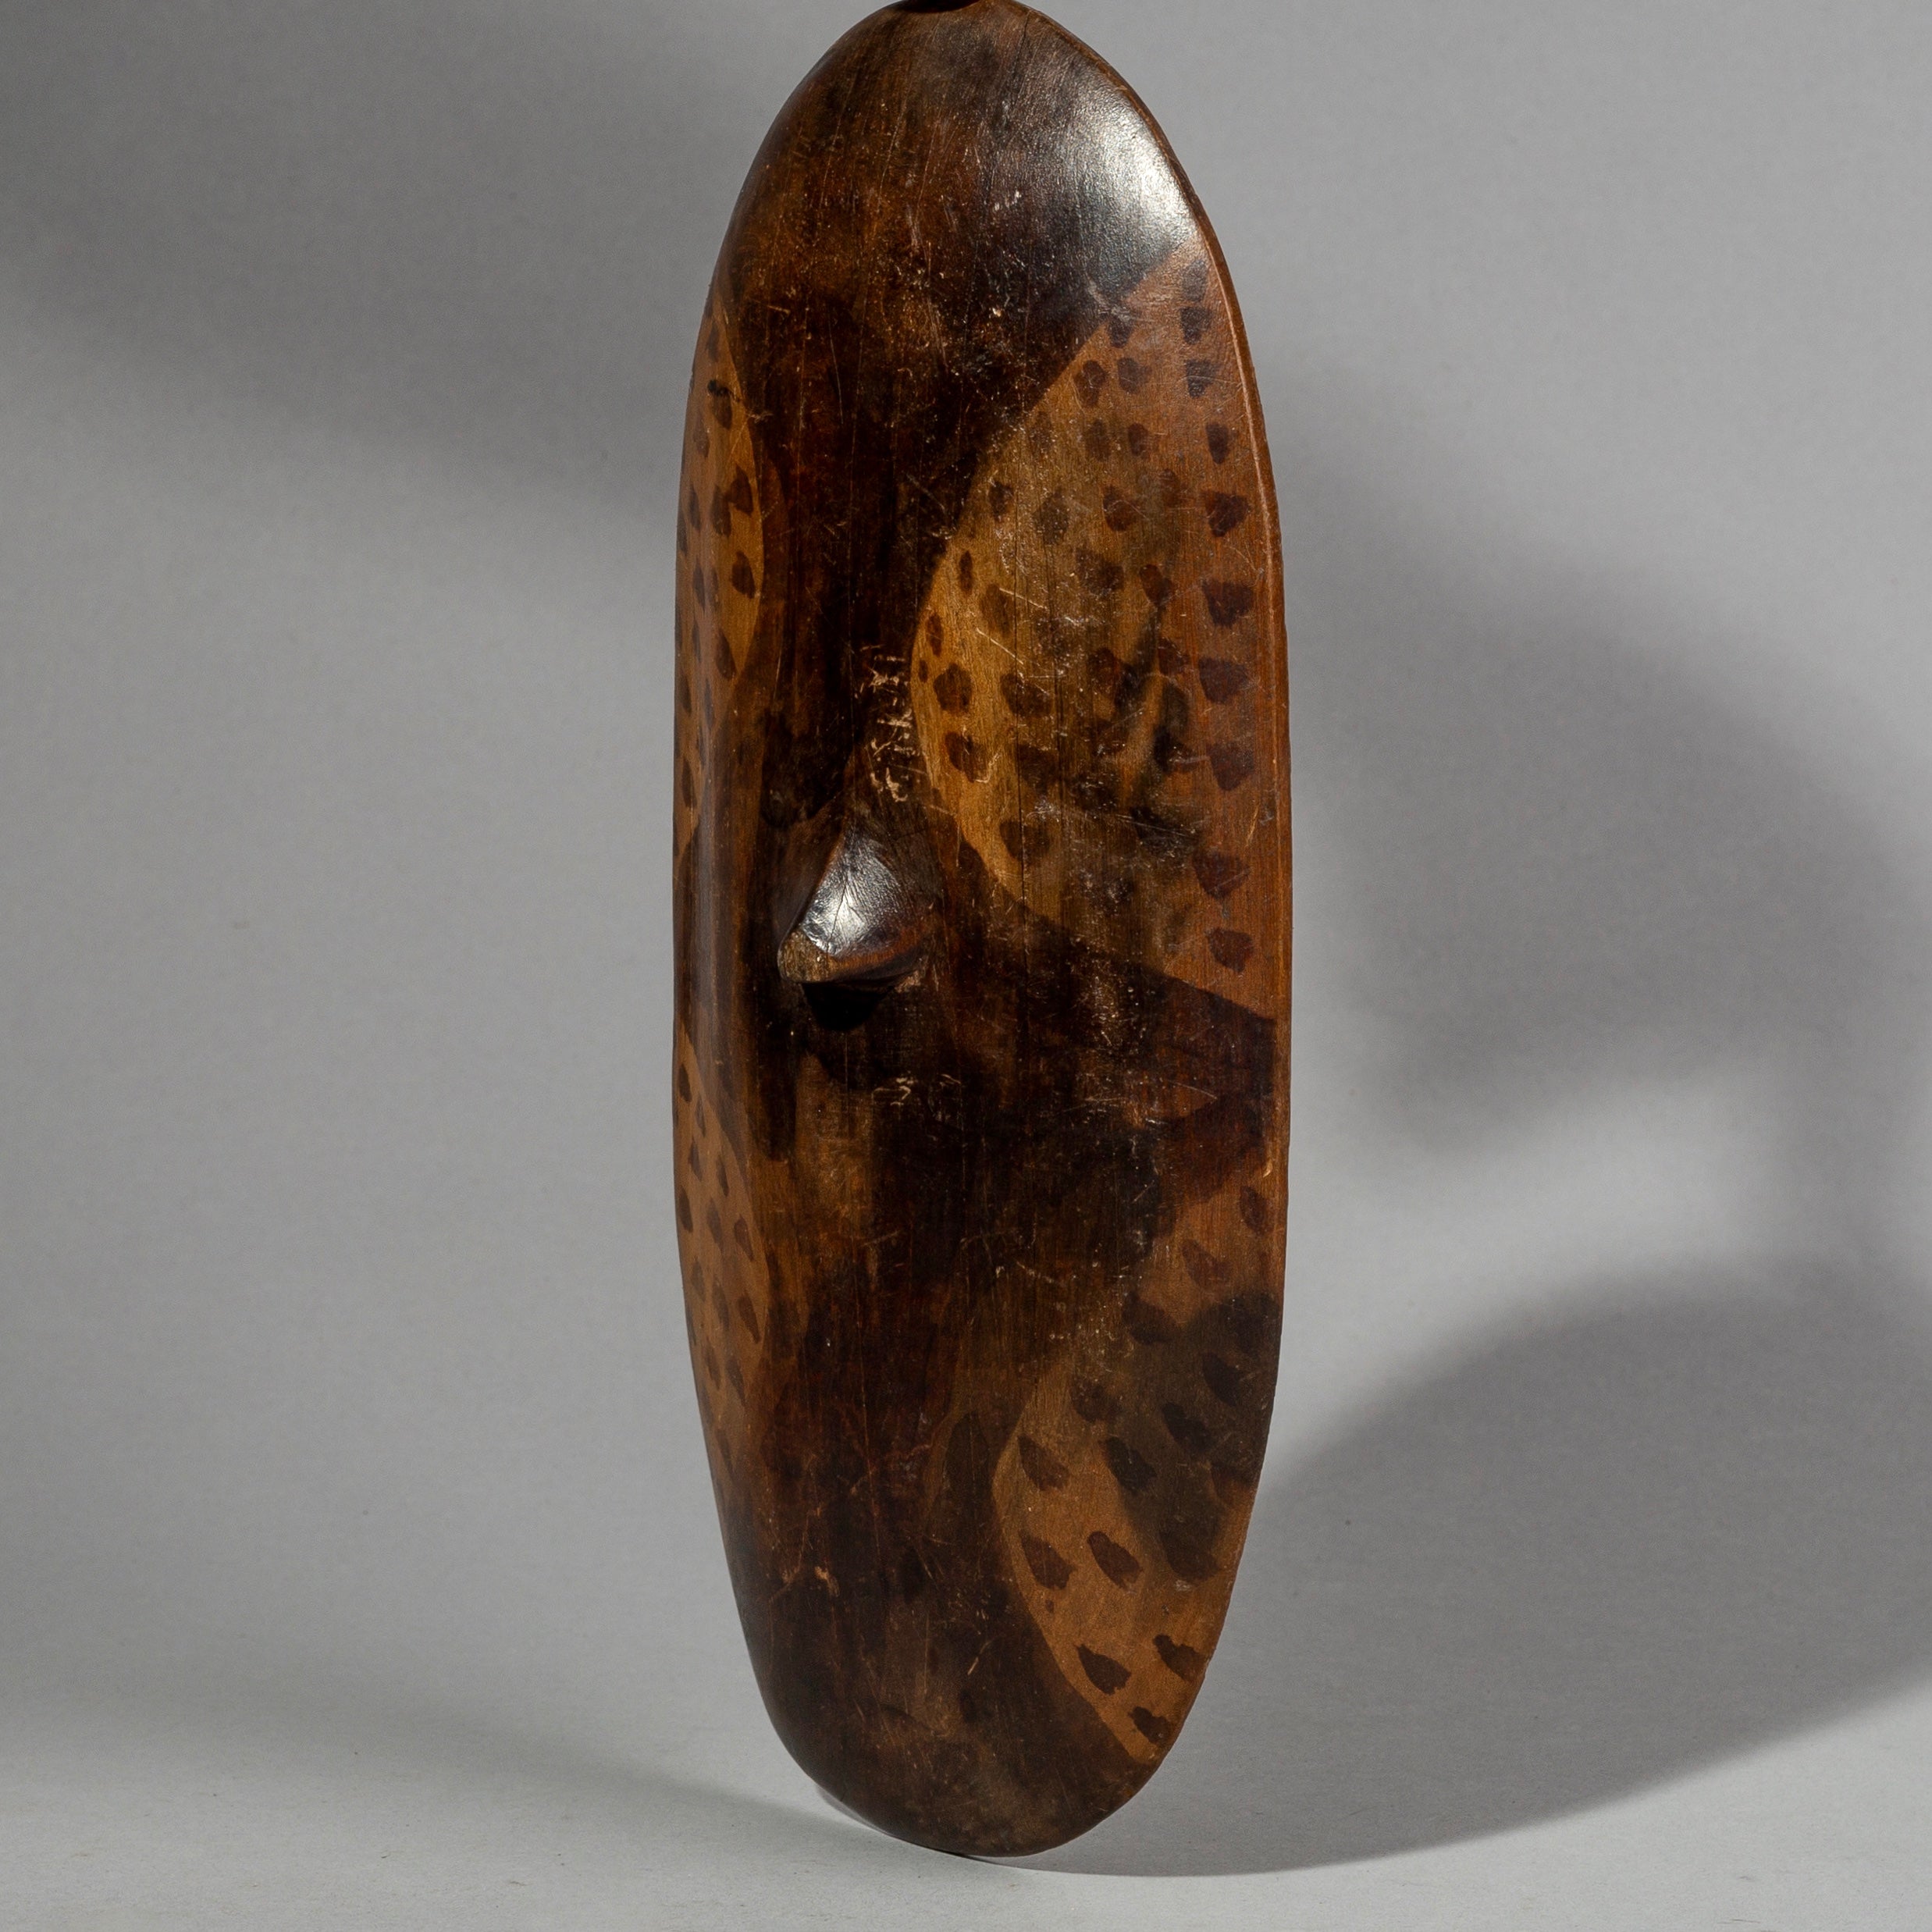 A SMALL WOODEN SHIELD FROM KENYA, EAST AFRICA( No 1654)